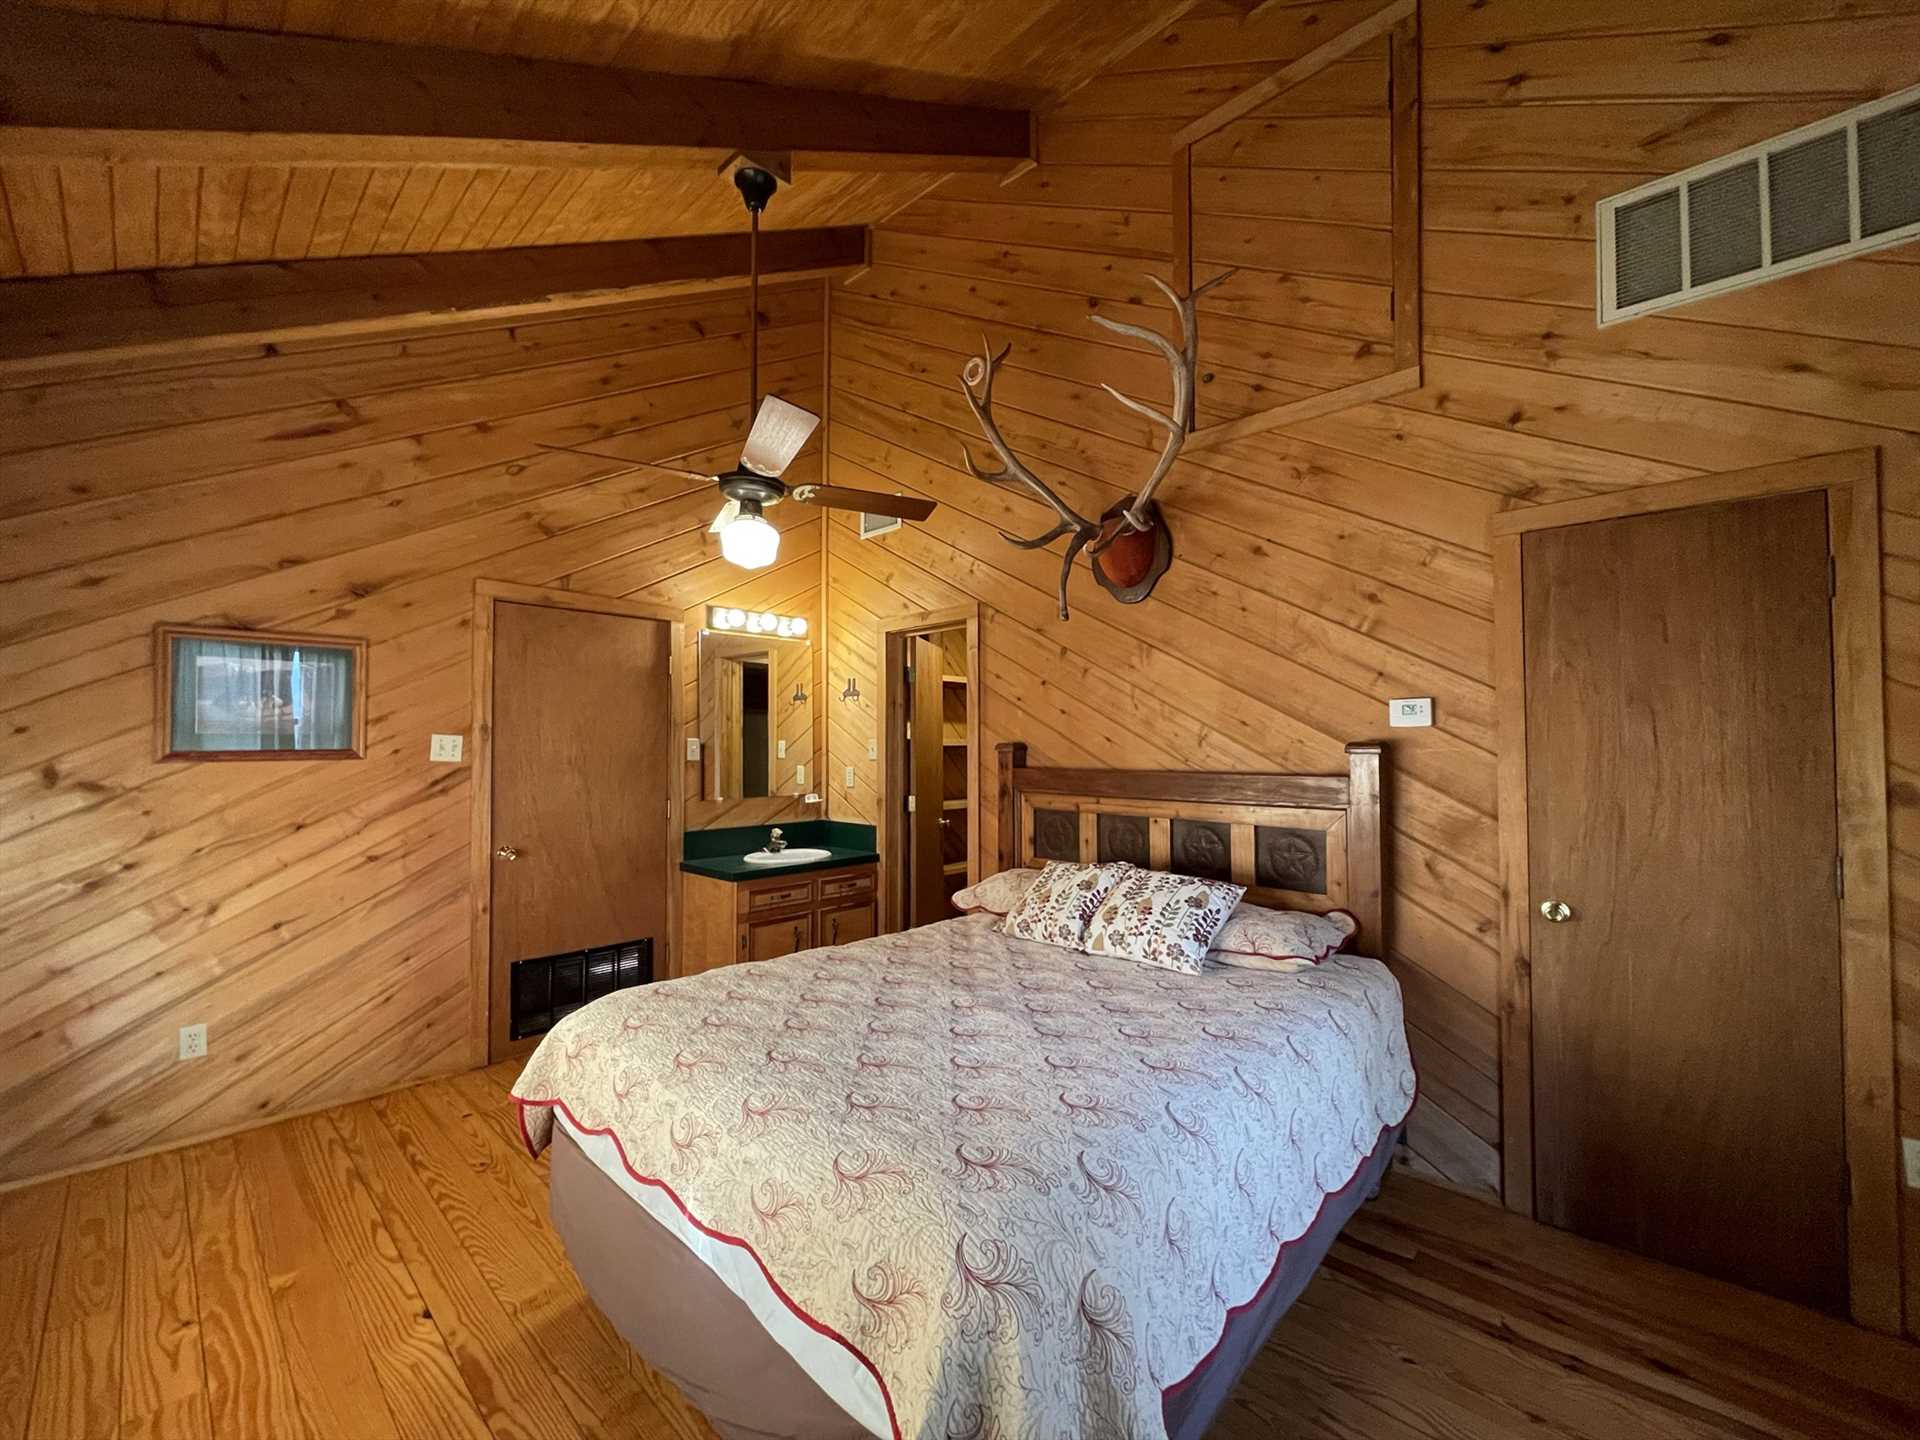                                                 As with the rest of the Lodge, the bedrooms come with ceiling fans and central AC and heat, so everything is just to your liking!